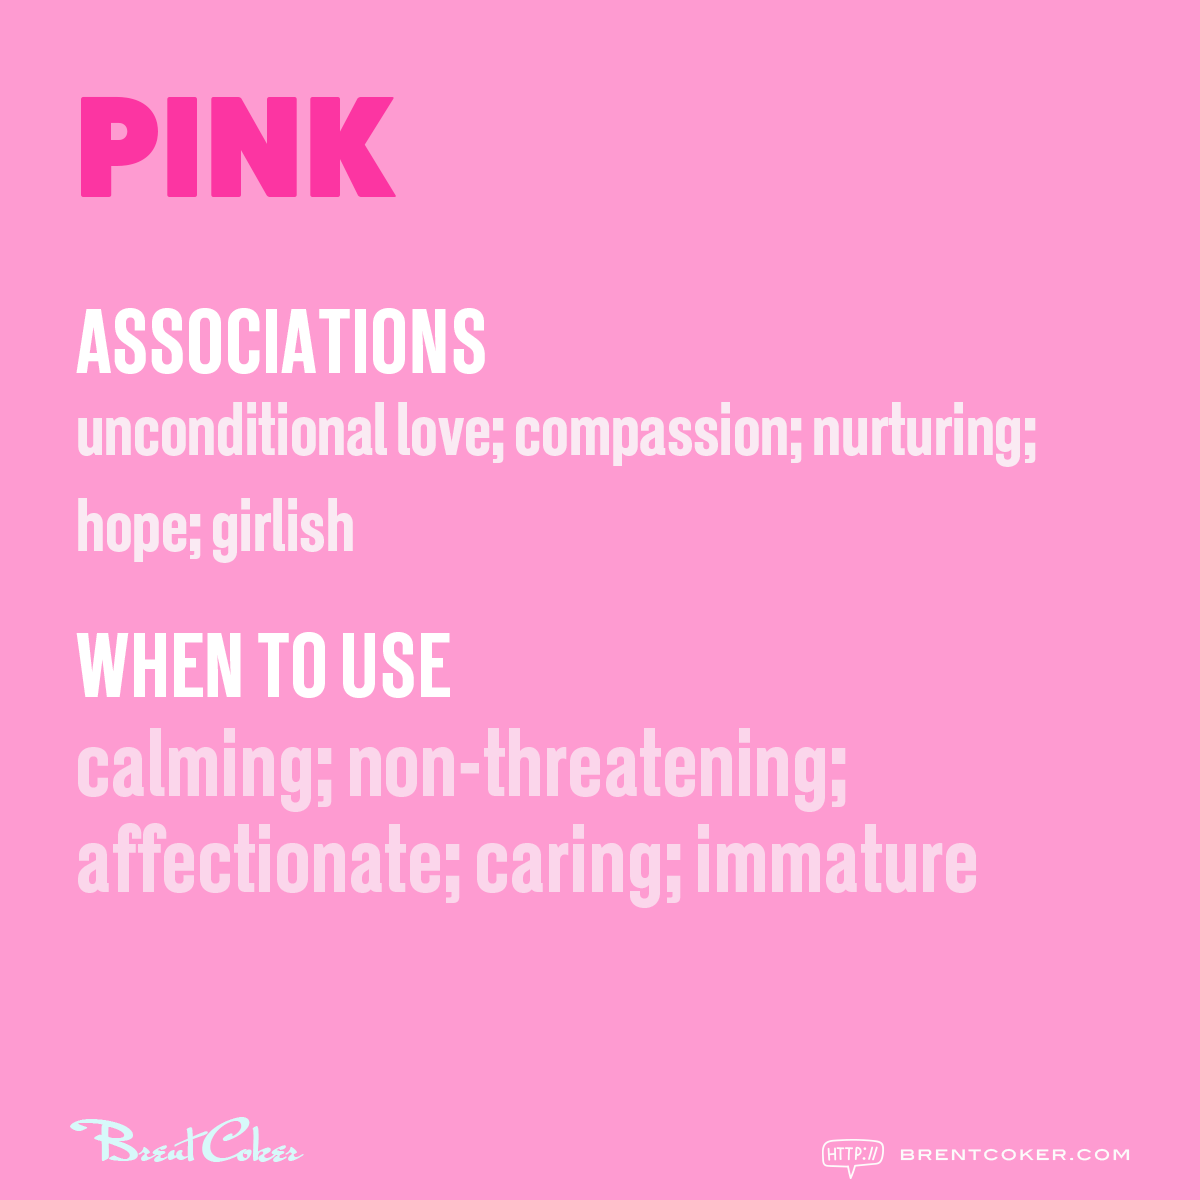 The psychology of colour in marketing Pink